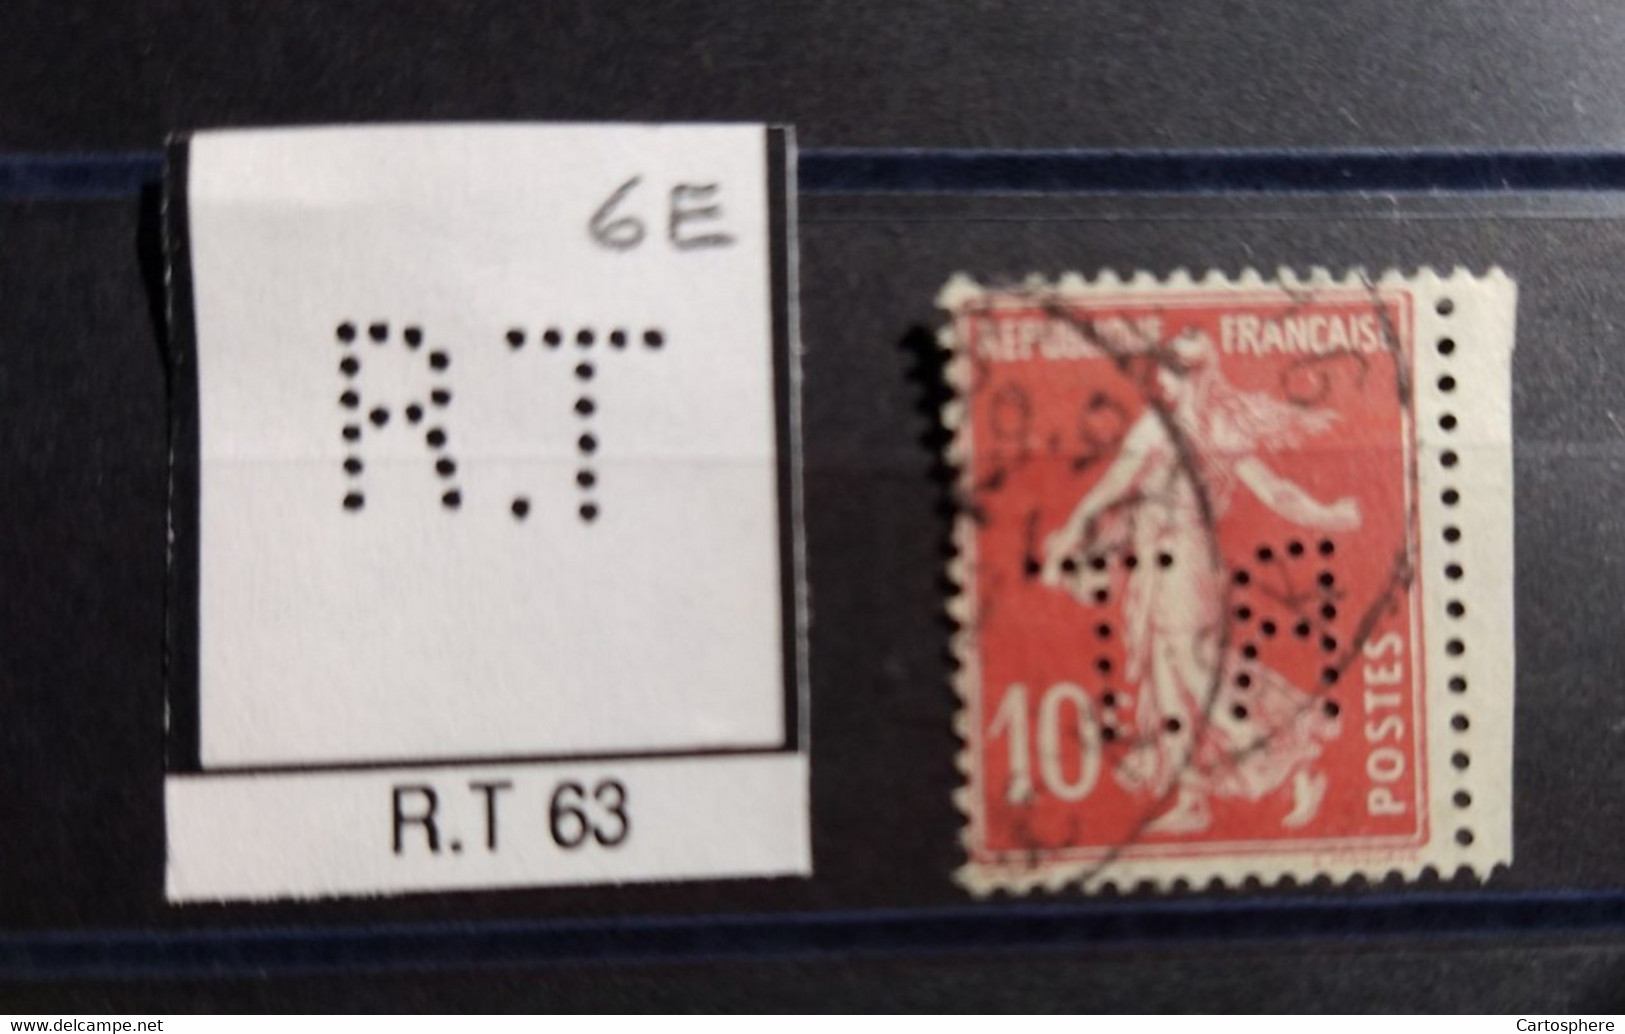 FRANCE TIMBRE RT 63 INDICE 6  SUR 138 PERFORE PERFORES PERFIN PERFINS PERFO PERFORATION PERFORIERT - Gebraucht